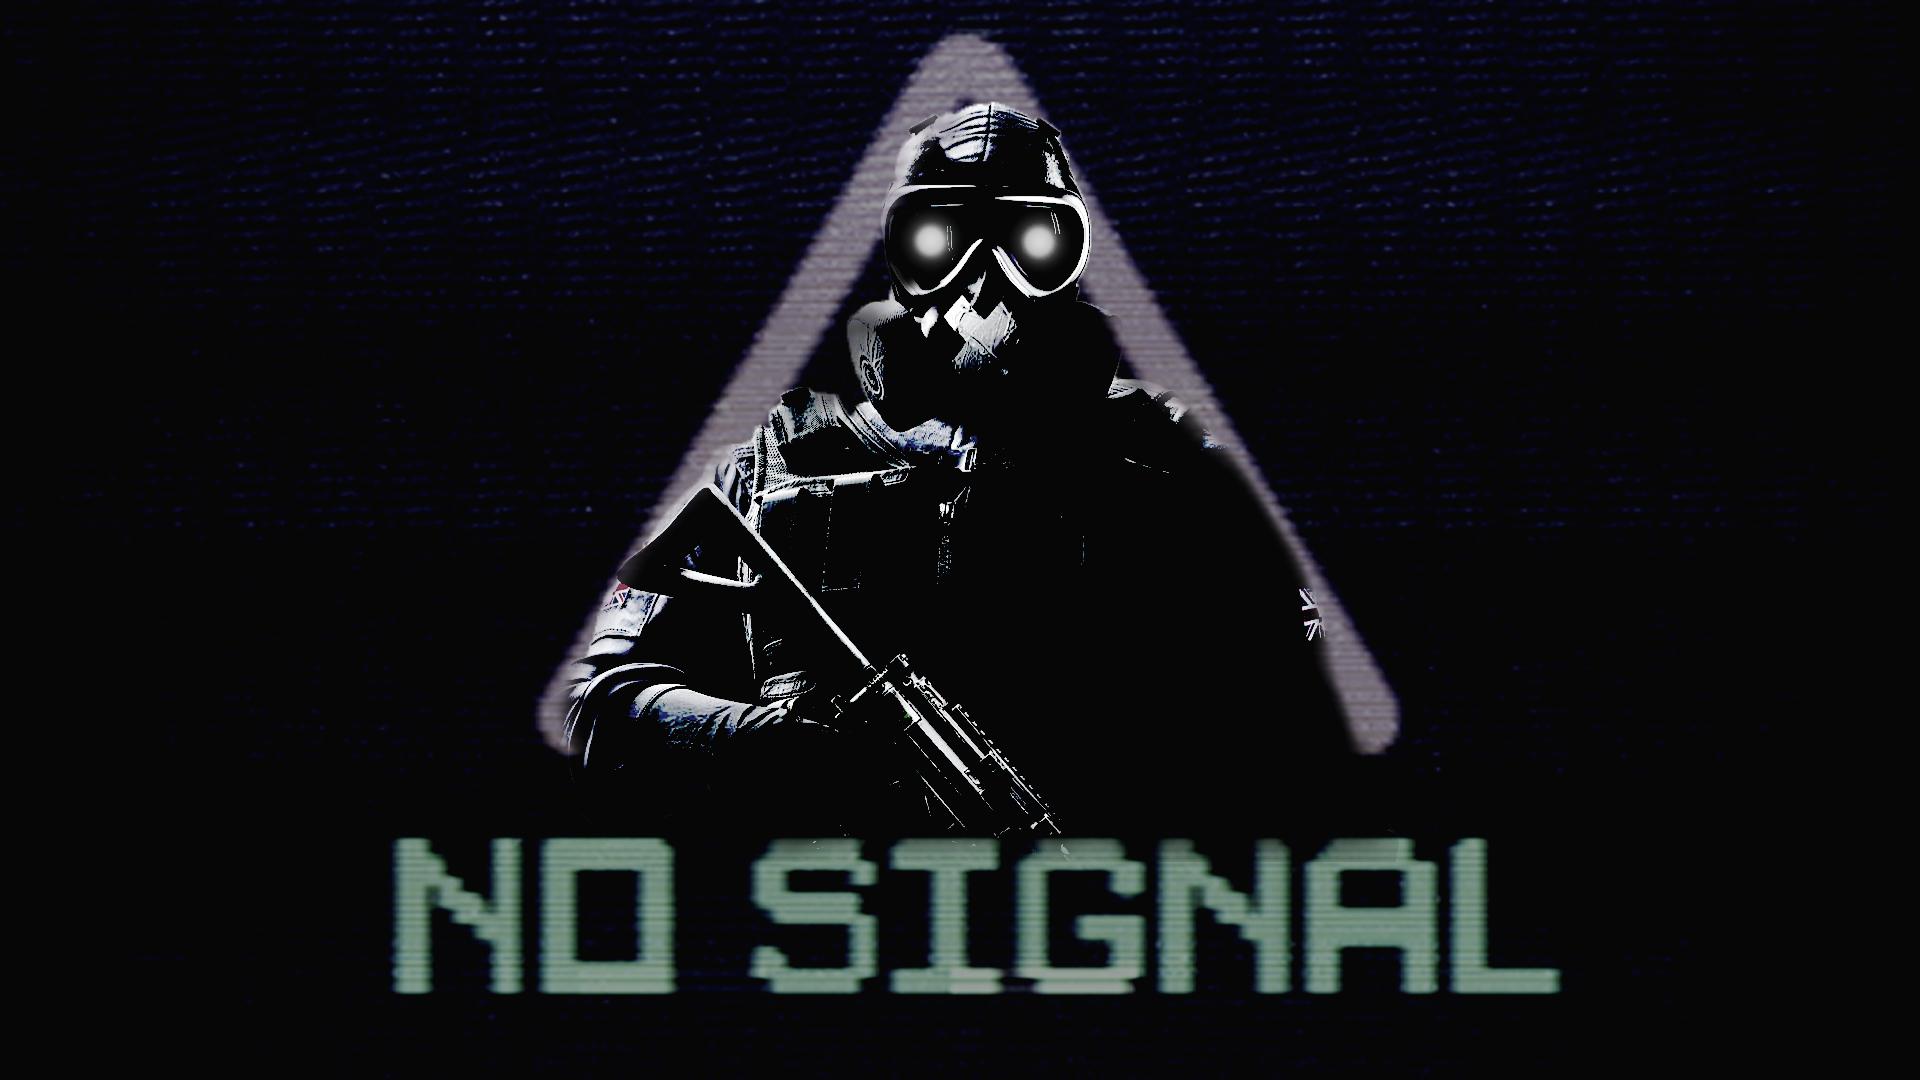 Mute wallpaper 1920x1080. I hope you like it. If you want more like this, just write down a comment